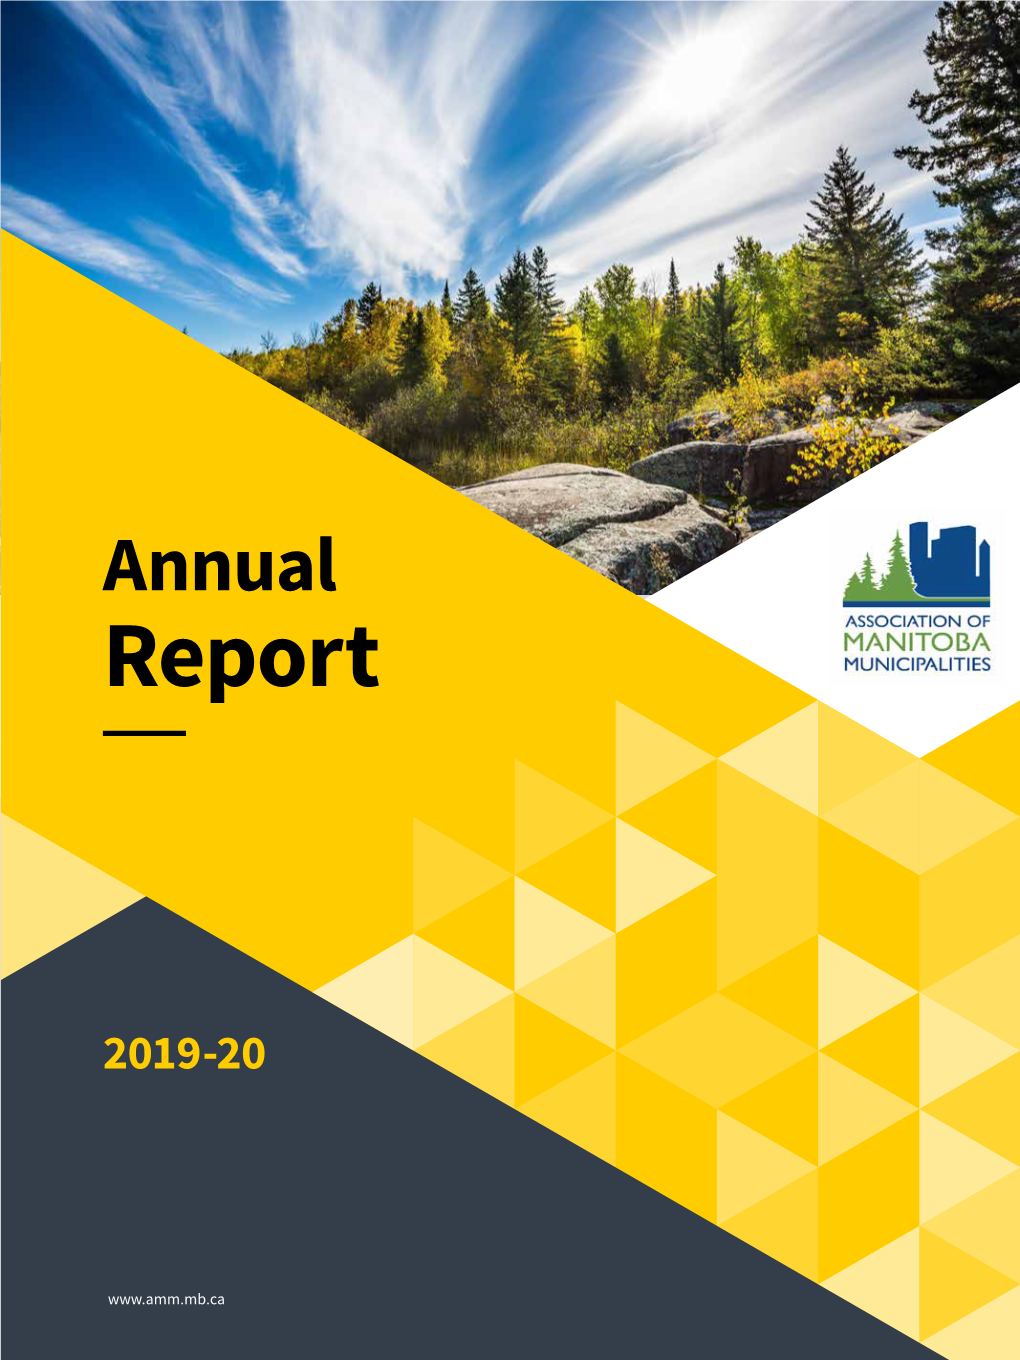 View the 2019-2020 AMM Annual Report HERE!